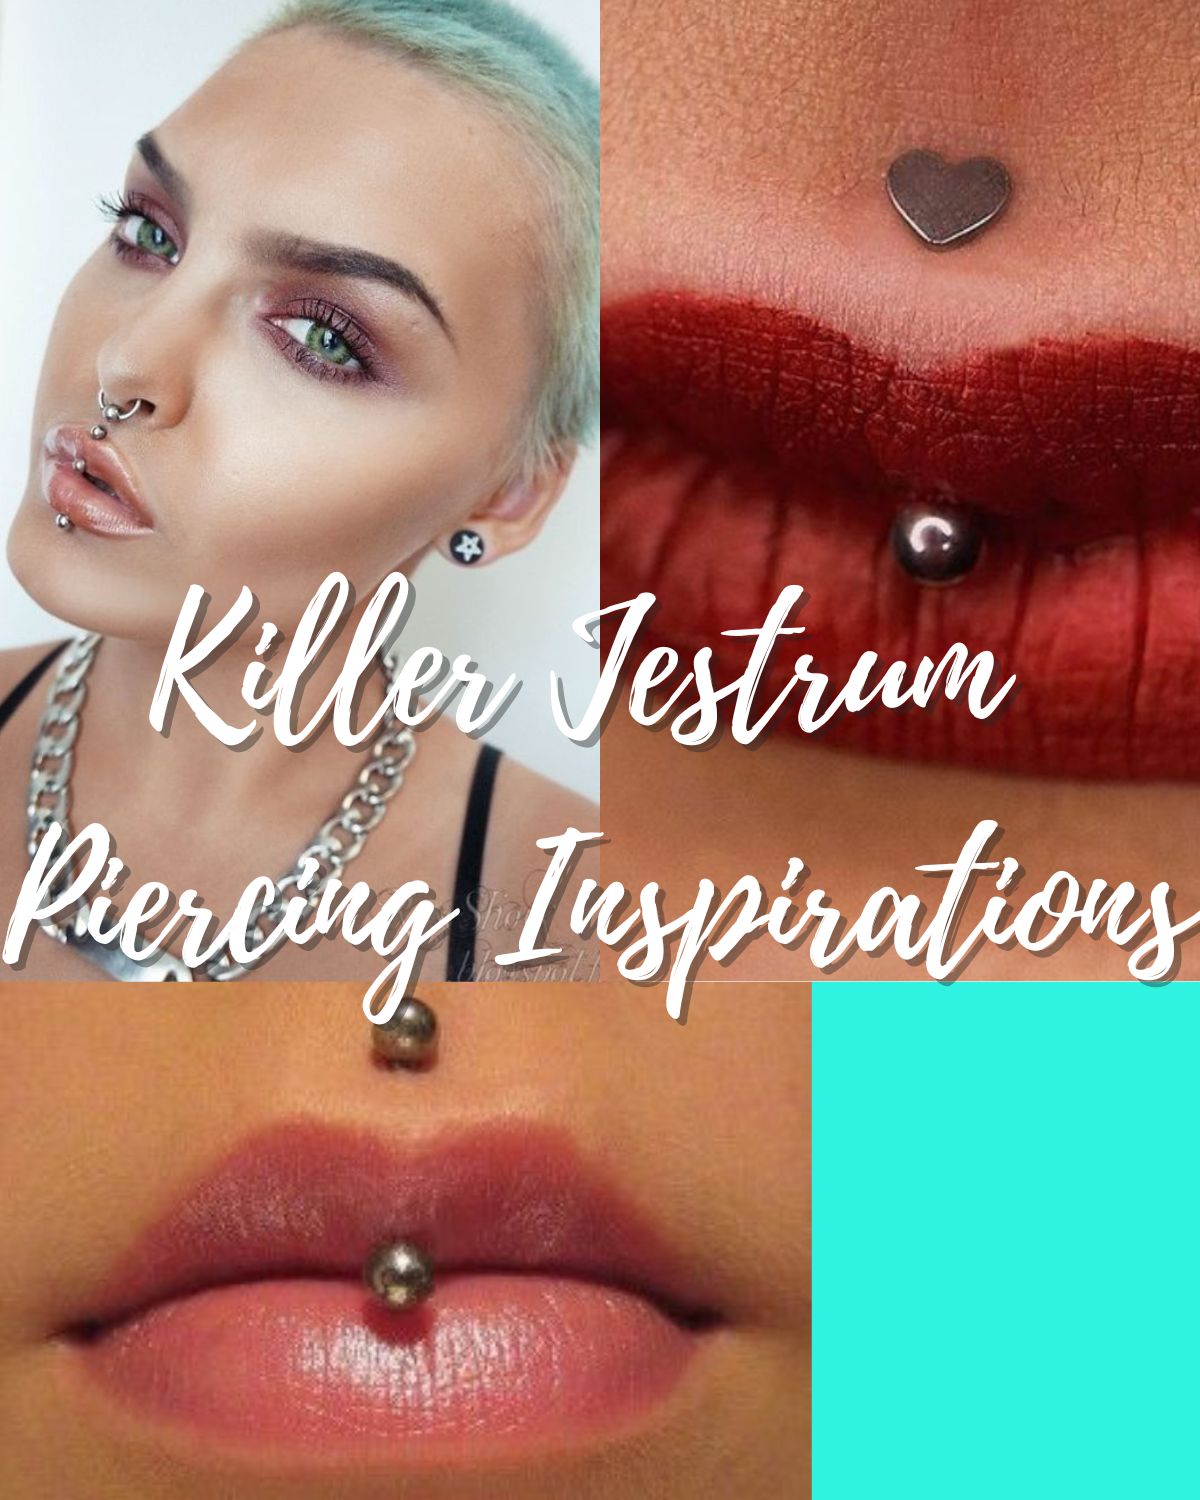 Three women with jestrum lip rings and other piercings 